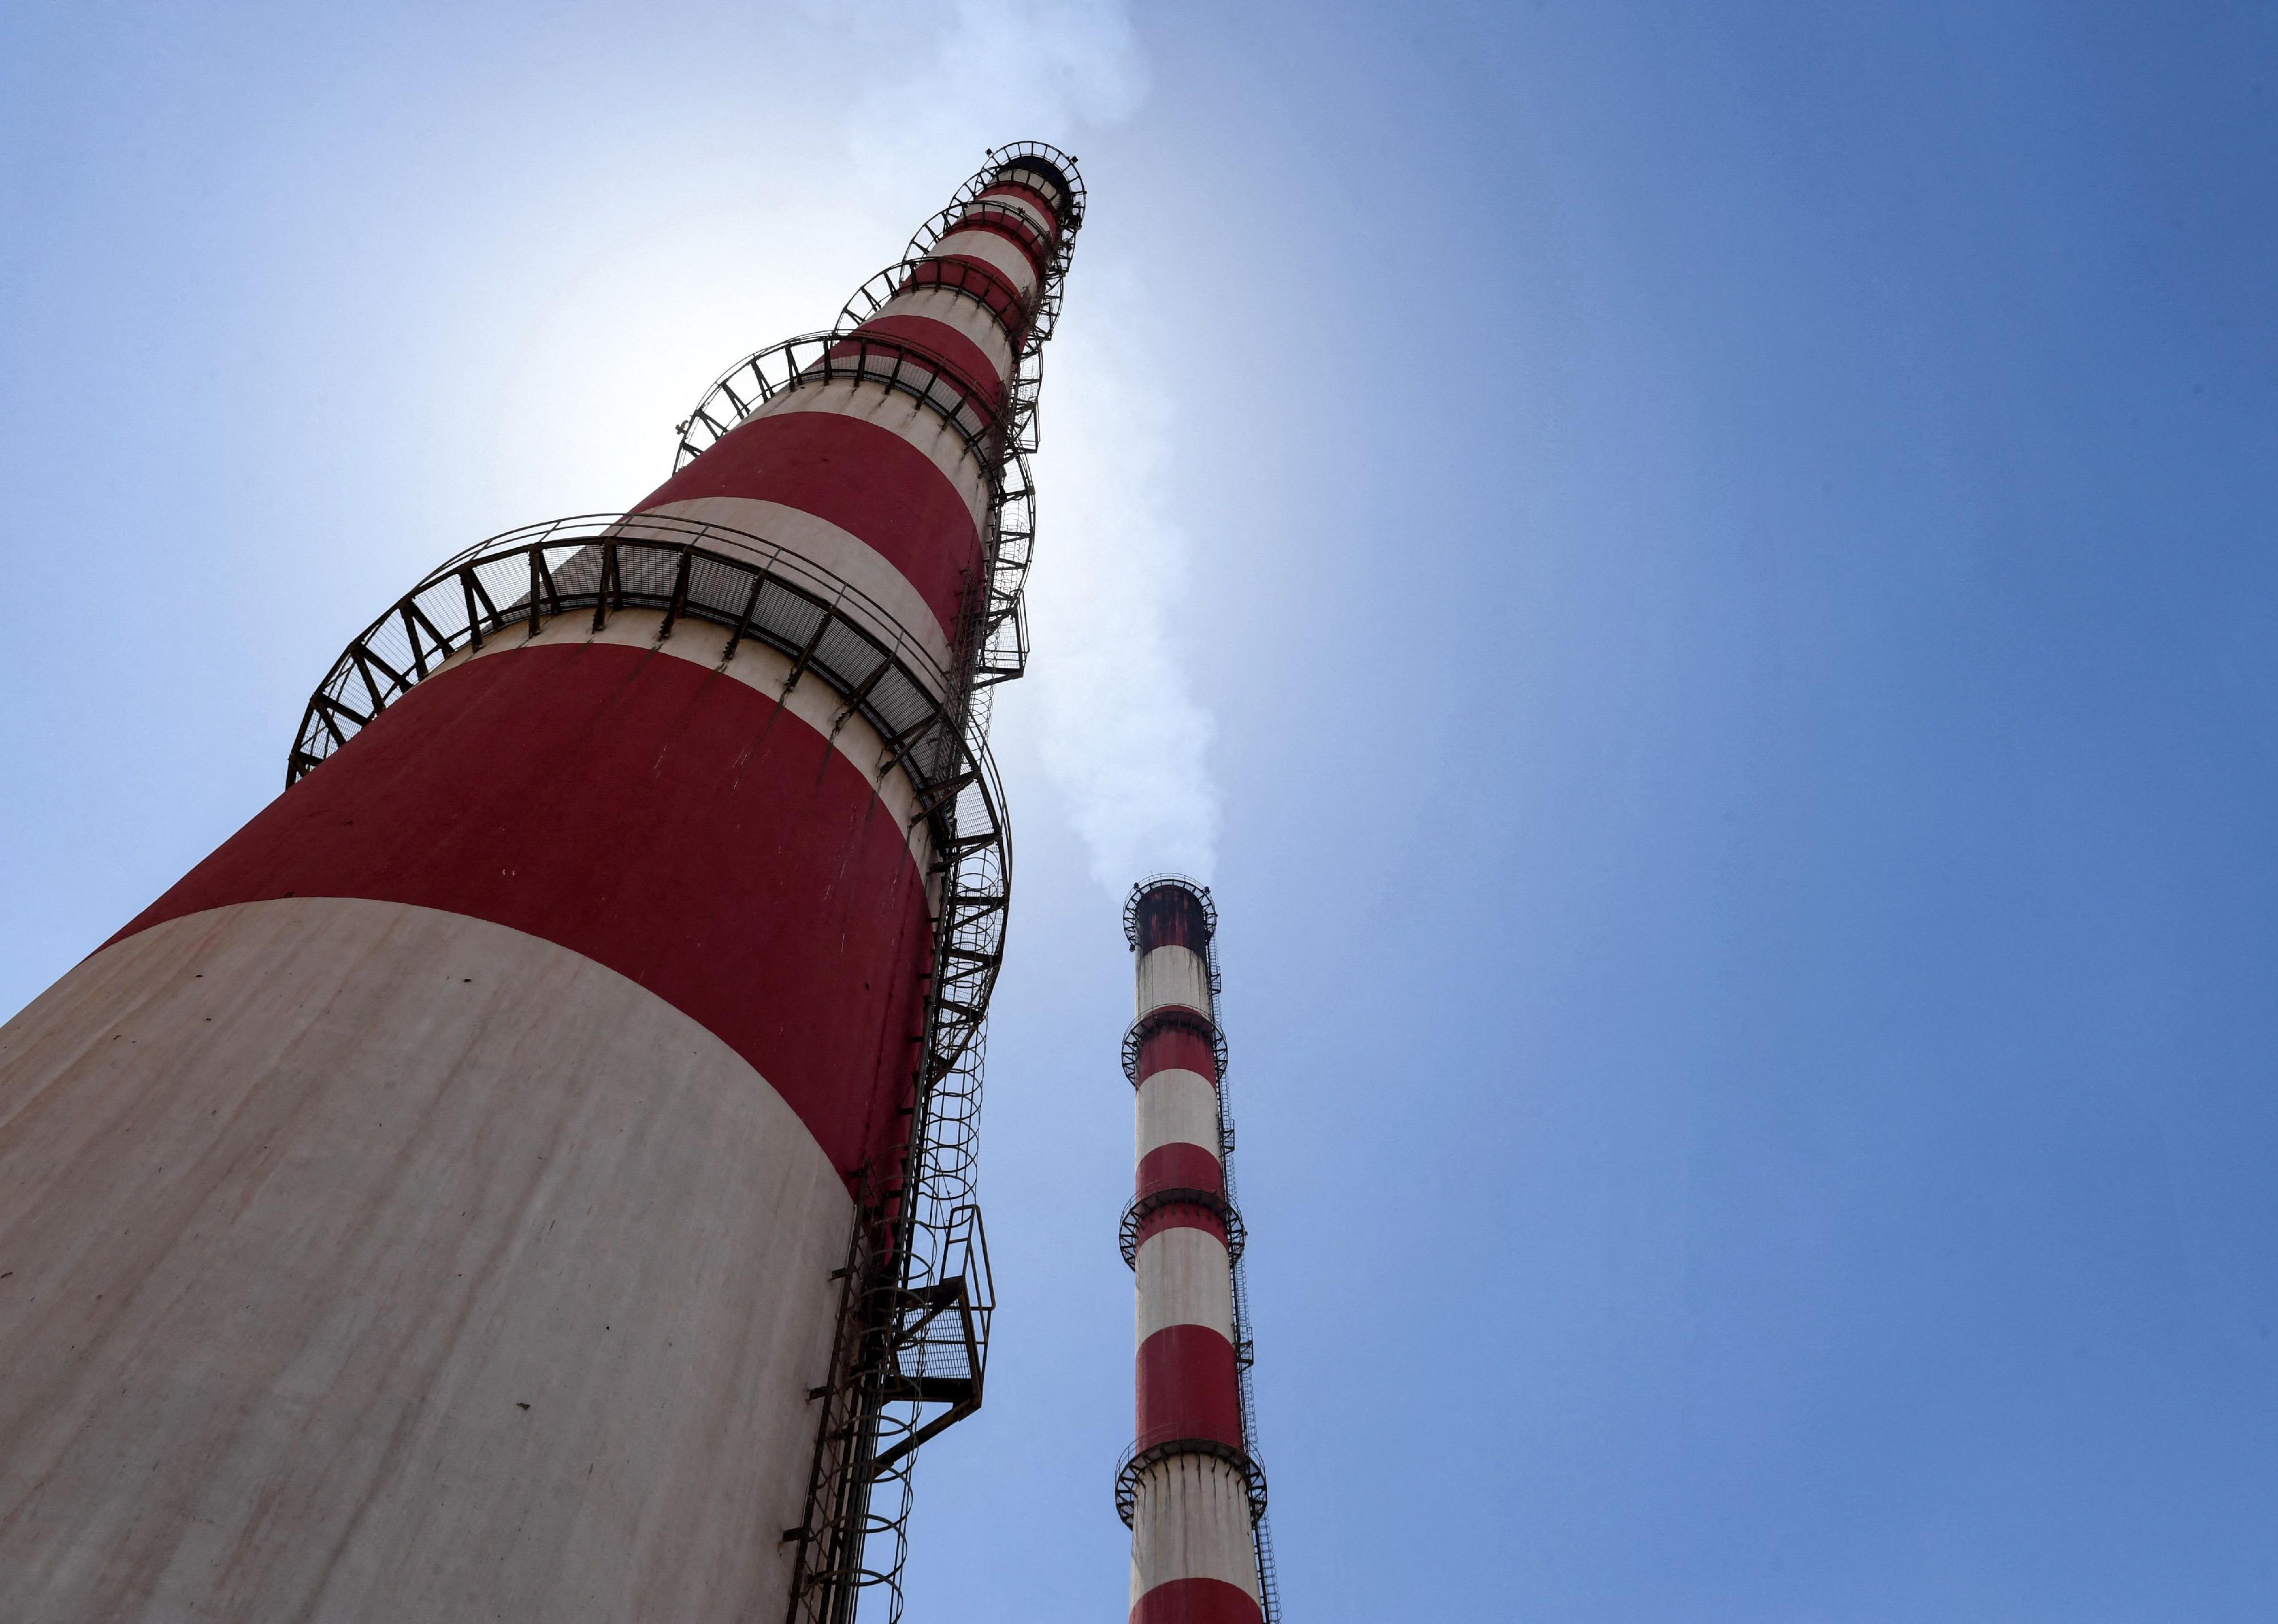 Red-and-white striped chimneys at the thermal natural gas and fuel-oil power plant serving Syria's northern city of Aleppo.